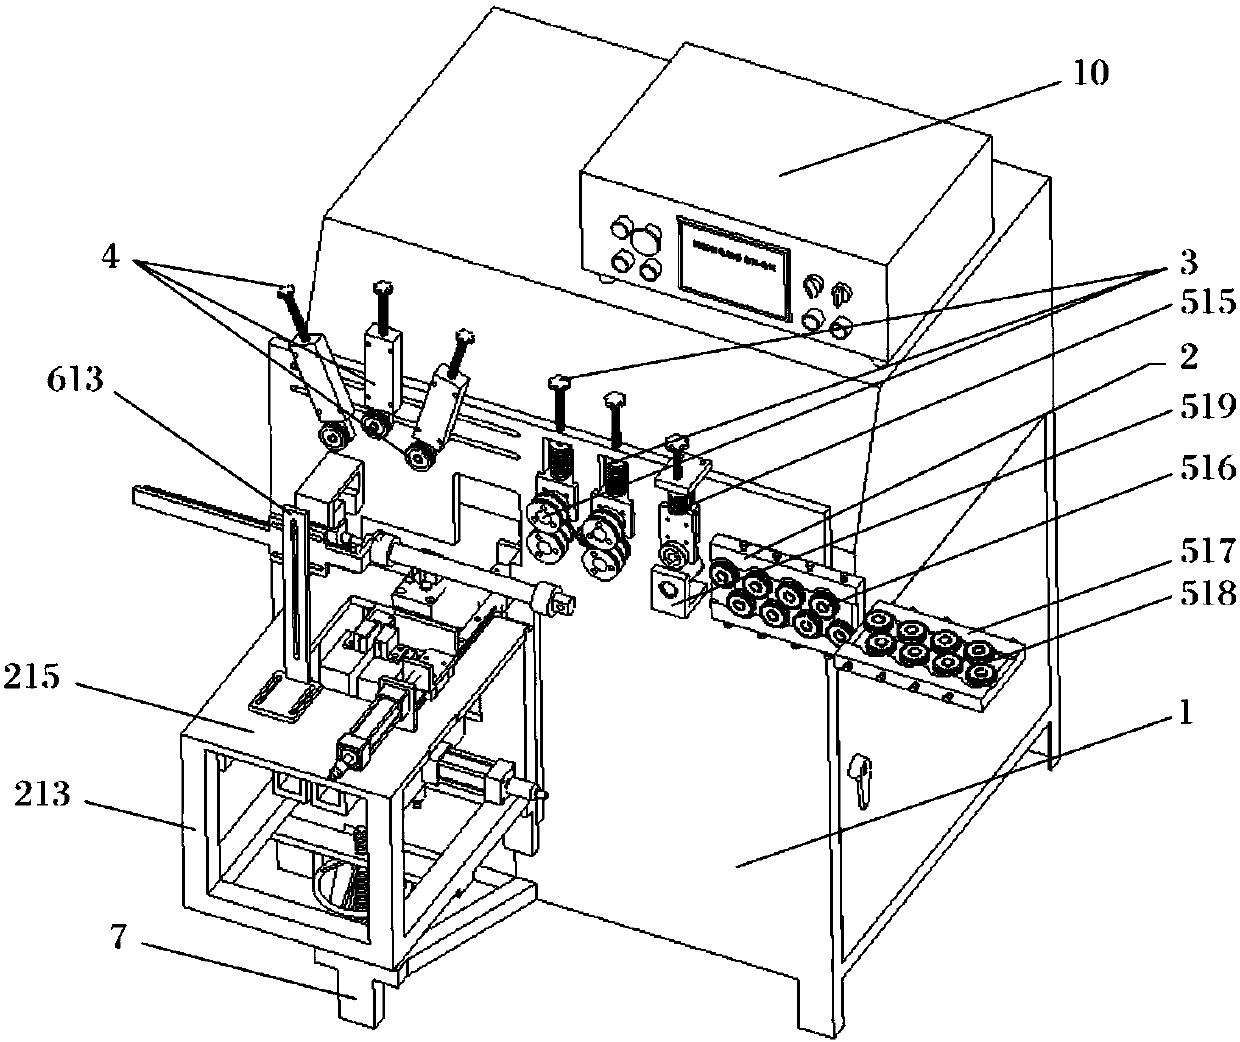 Full-automatic looping and butt-welding integrated machine